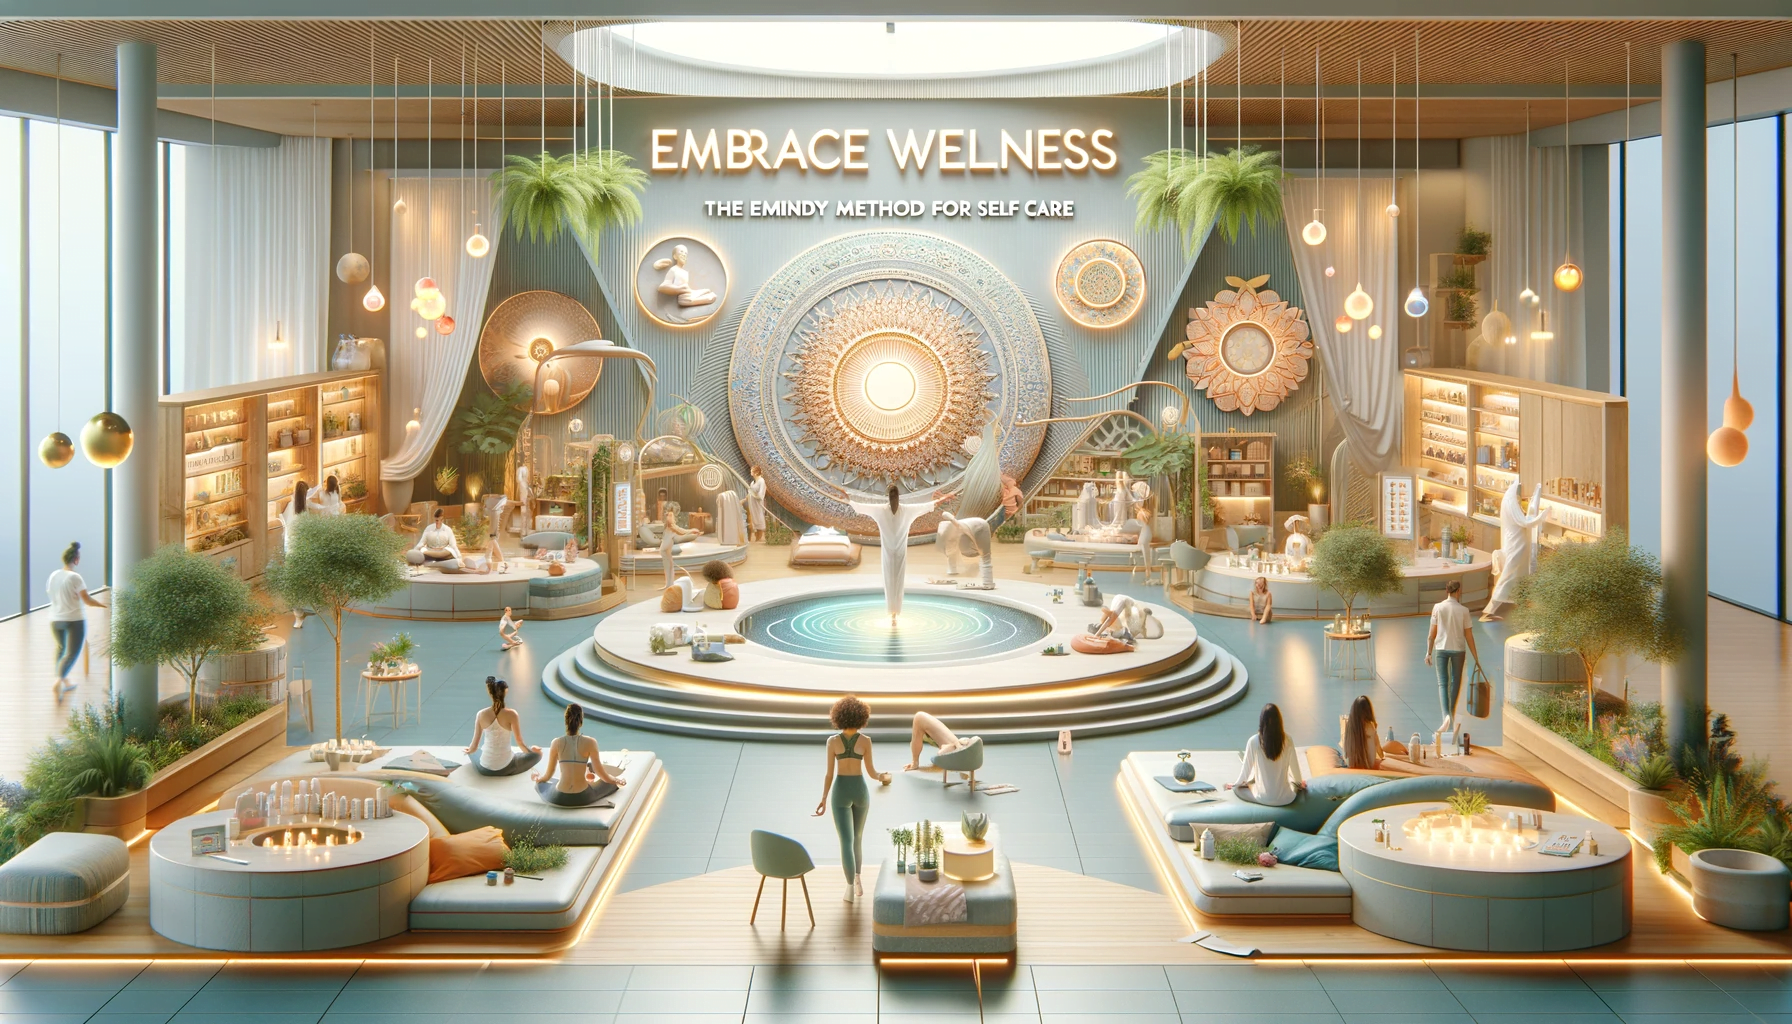 Embrace Wellness: The eMINDy Method for Self Care